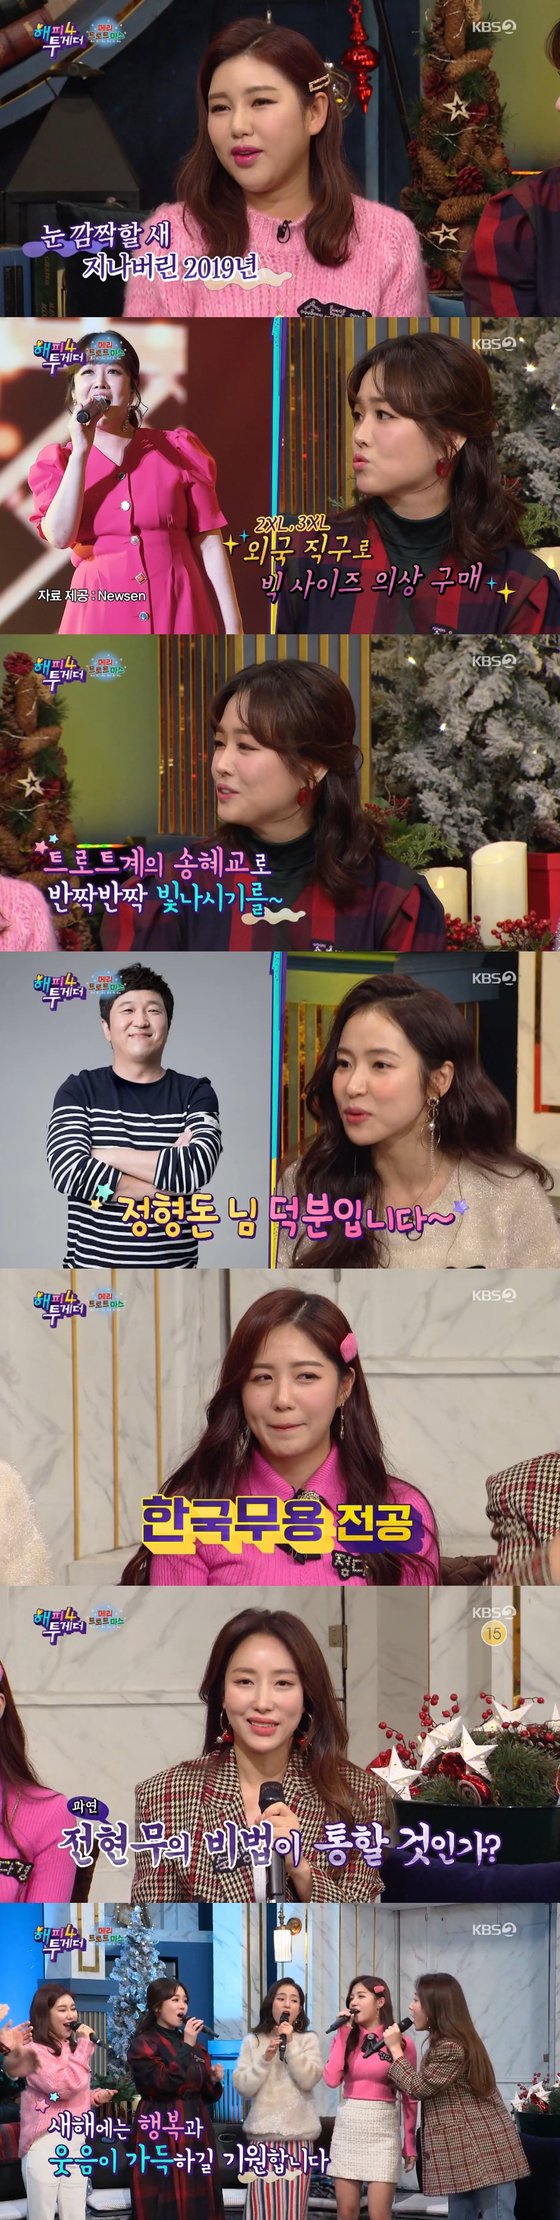 KBS2 Happy Together 4 (hereinafter referred to as The Battle 4), which was broadcast on the 26th, was featured in Mary Trotmas and was featured on TV Chosun MissMr.Trot and Song Ga-in, The Miami, Hongja, Jung Da Kyung, and Gukha, who appeared in the Trot and painted Korea in 2019 as a Trot craze.Song Ga-in, who recently beat Pensu in a vote and became the best hot star in 2019, said, I live and live and this day comes, it is still a dream.He also proved to be the best star of the year, referring to popular culture and arts awards, concert sales, and awards ceremony performances.His anecdote, which regards the unity of the party as important, also created a new character called Songdae, which was impressed by the appearance of taking younger students than anyone else.I did not even fit 2XL, 3XL, but now I have lost a size 66, said The Miami, who appeared to be out of weight.In the words of Song Ga-in, who resembles Song Hye-kyo, The Miami was embarrassed and said, I actually heard such a story from a young age.Hongja, who says this year is the year of reincarnation, said he lost his real name Park Ji-min at home and said, My mother also calls him Hongja ~ and laughed.Now, the name Hongja, which is more like a real name than his real name, is the name born thanks to Jung Hyung Don. I want to buy you a meal.The Korean dance version of Mamma, which boasts a beautiful dance line, and the parade of the trot-based Cy Young-heung-saeng-saeng parade also focused attention.The prowling can Trot any song, and even Beyonces song was reinterpreted as Trot and still navel.The lecture of the seniors toward the Trot-based weapon heritage chain connecting them was also a laughing point.It is a one-point lesson for strong control, vibration, stage manners, etc., and upgraded the heritage chain further.In addition, Song Ga-in proposed a duet with Yun Song and suggested that the profit is 5 to 5, and the song will be added.The audience rating of the show rose sharply from the previous broadcast, with the appearance of Trot female actresses armed with excitement and dedication, with 5.5 percent of Nielsen Koreas nationwide ratings (1 parts) and 6.6 percent (2 parts).By metropolitan area, it recorded as much as 7.1% (part 2).